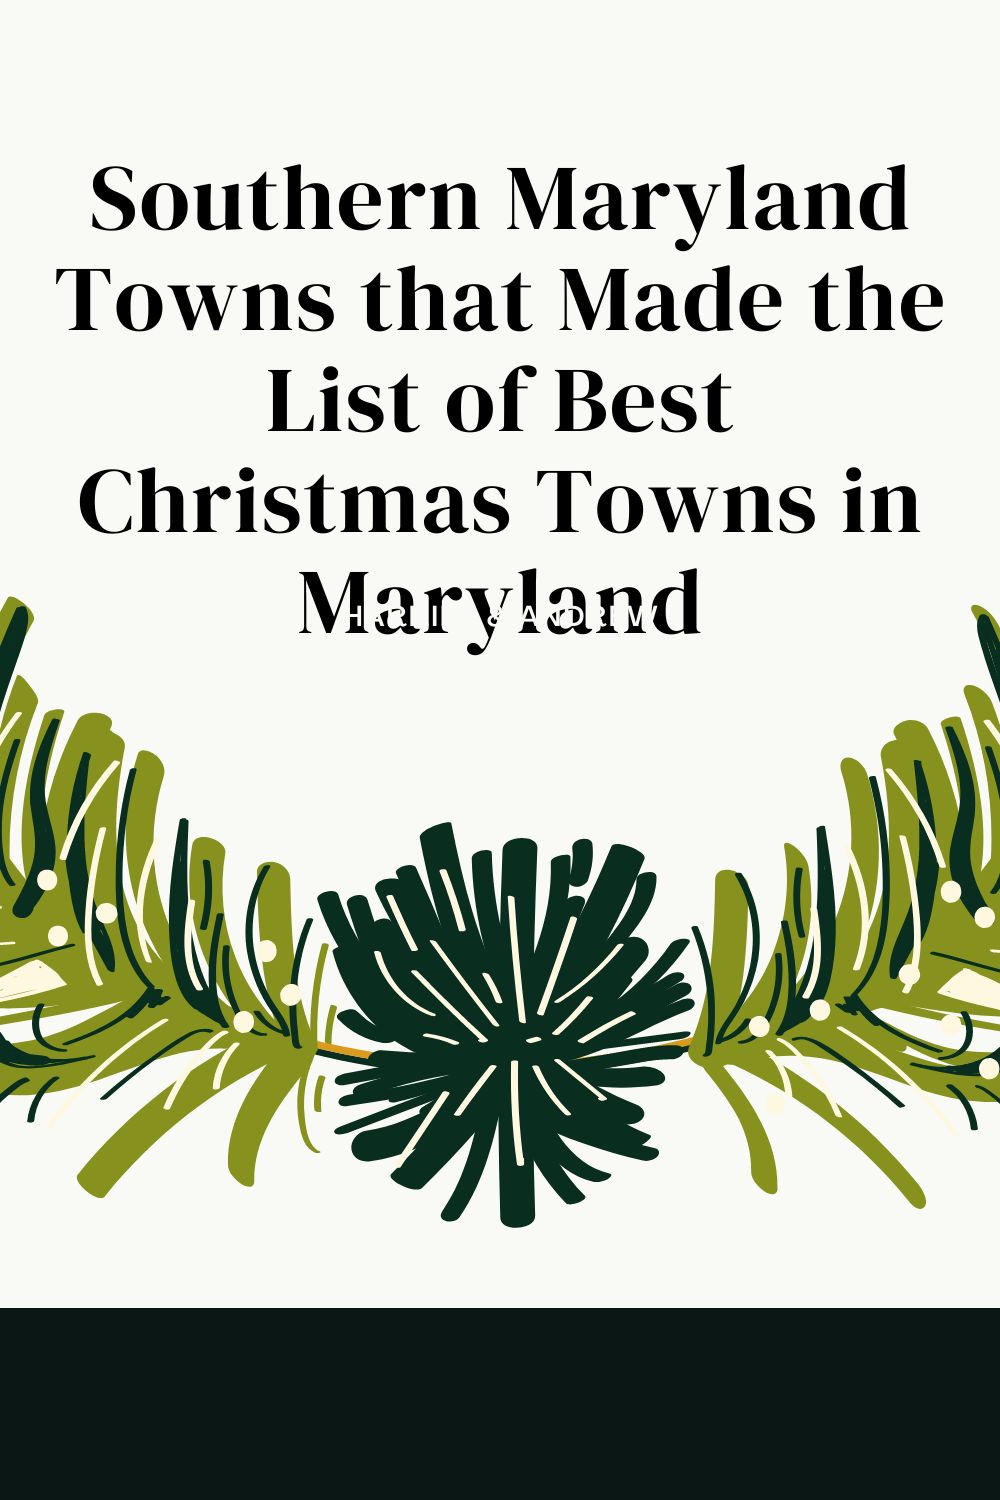 Southern Maryland Towns that Made the List of Best Christmas Towns in Maryland